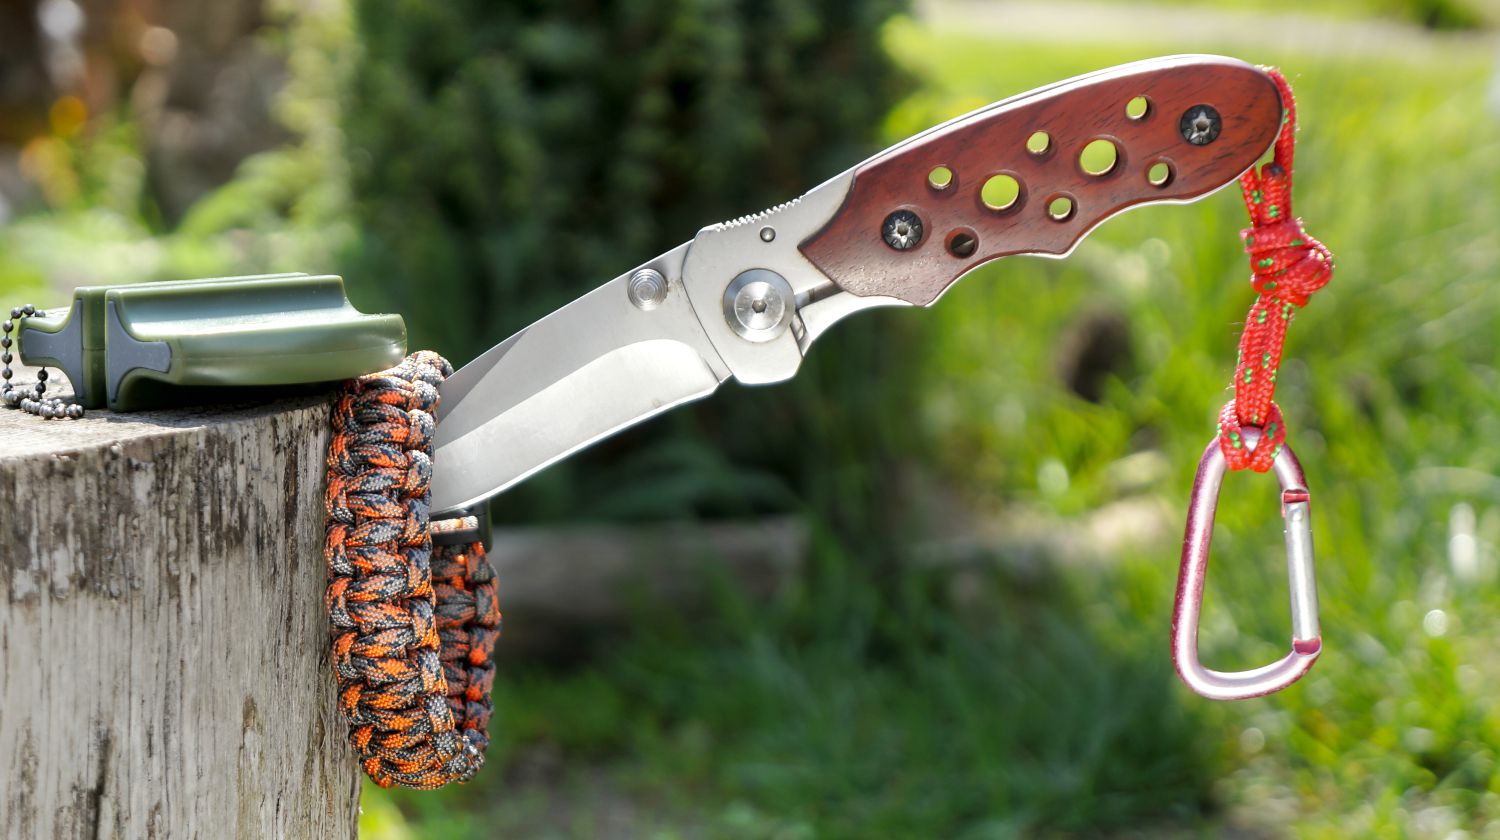 Survival kit knife and paracord bracelet | Bear Grylls' Survival Kit Review | Featured